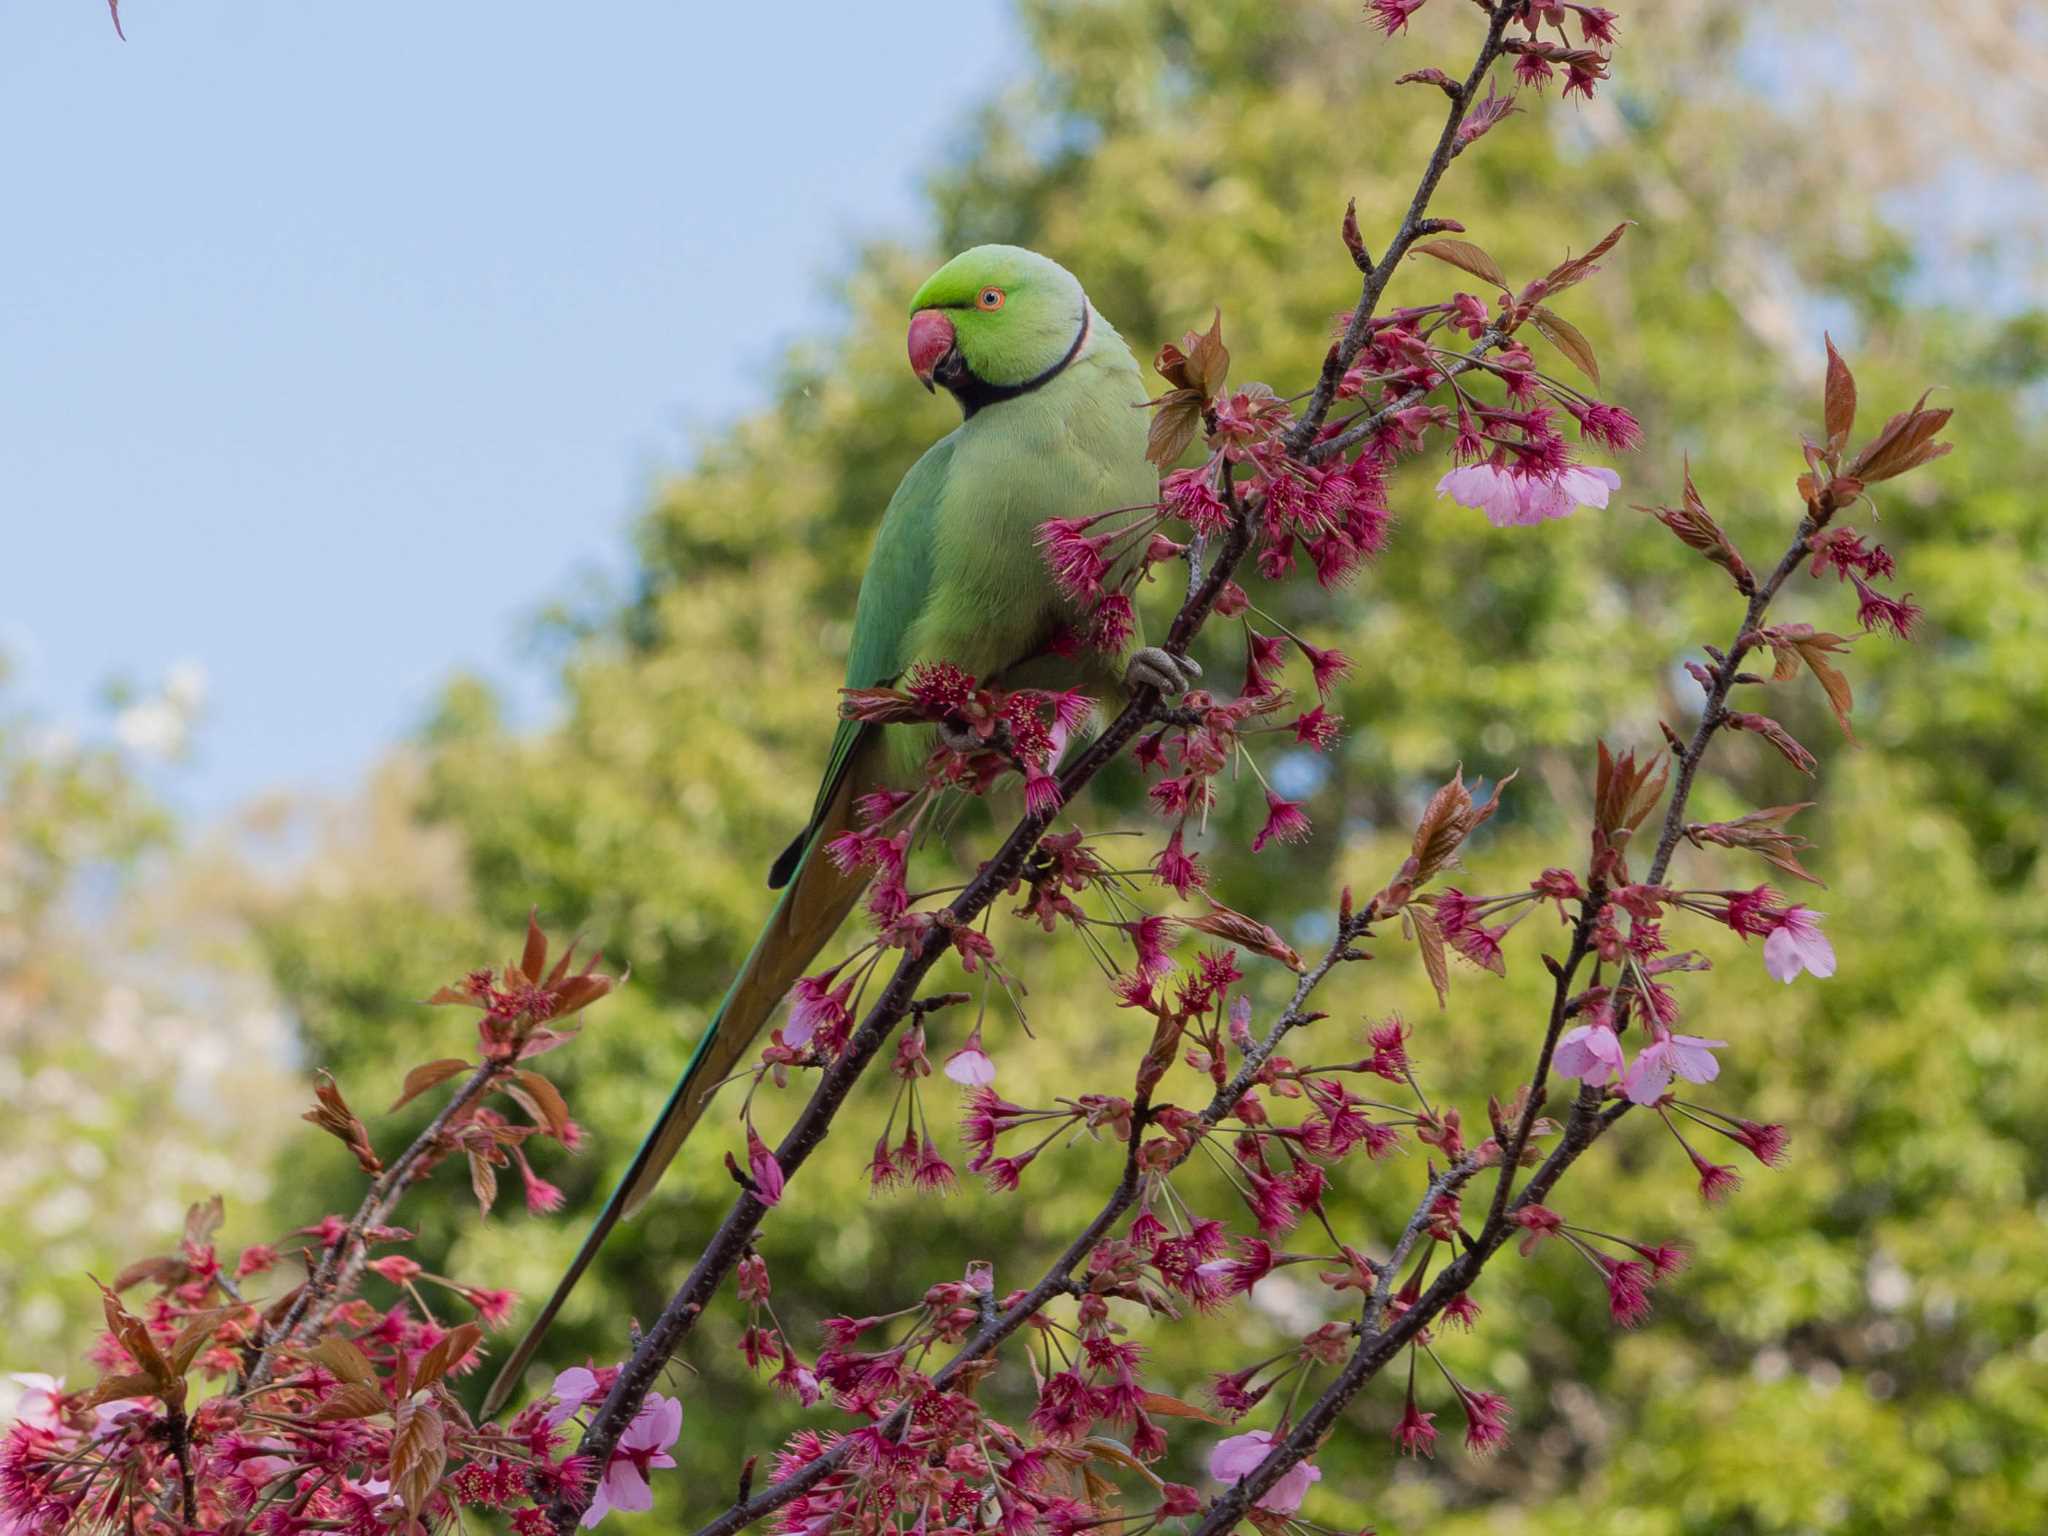 Photo of Indian Rose-necked Parakeet at Mitsuike Park by Tosh@Bird